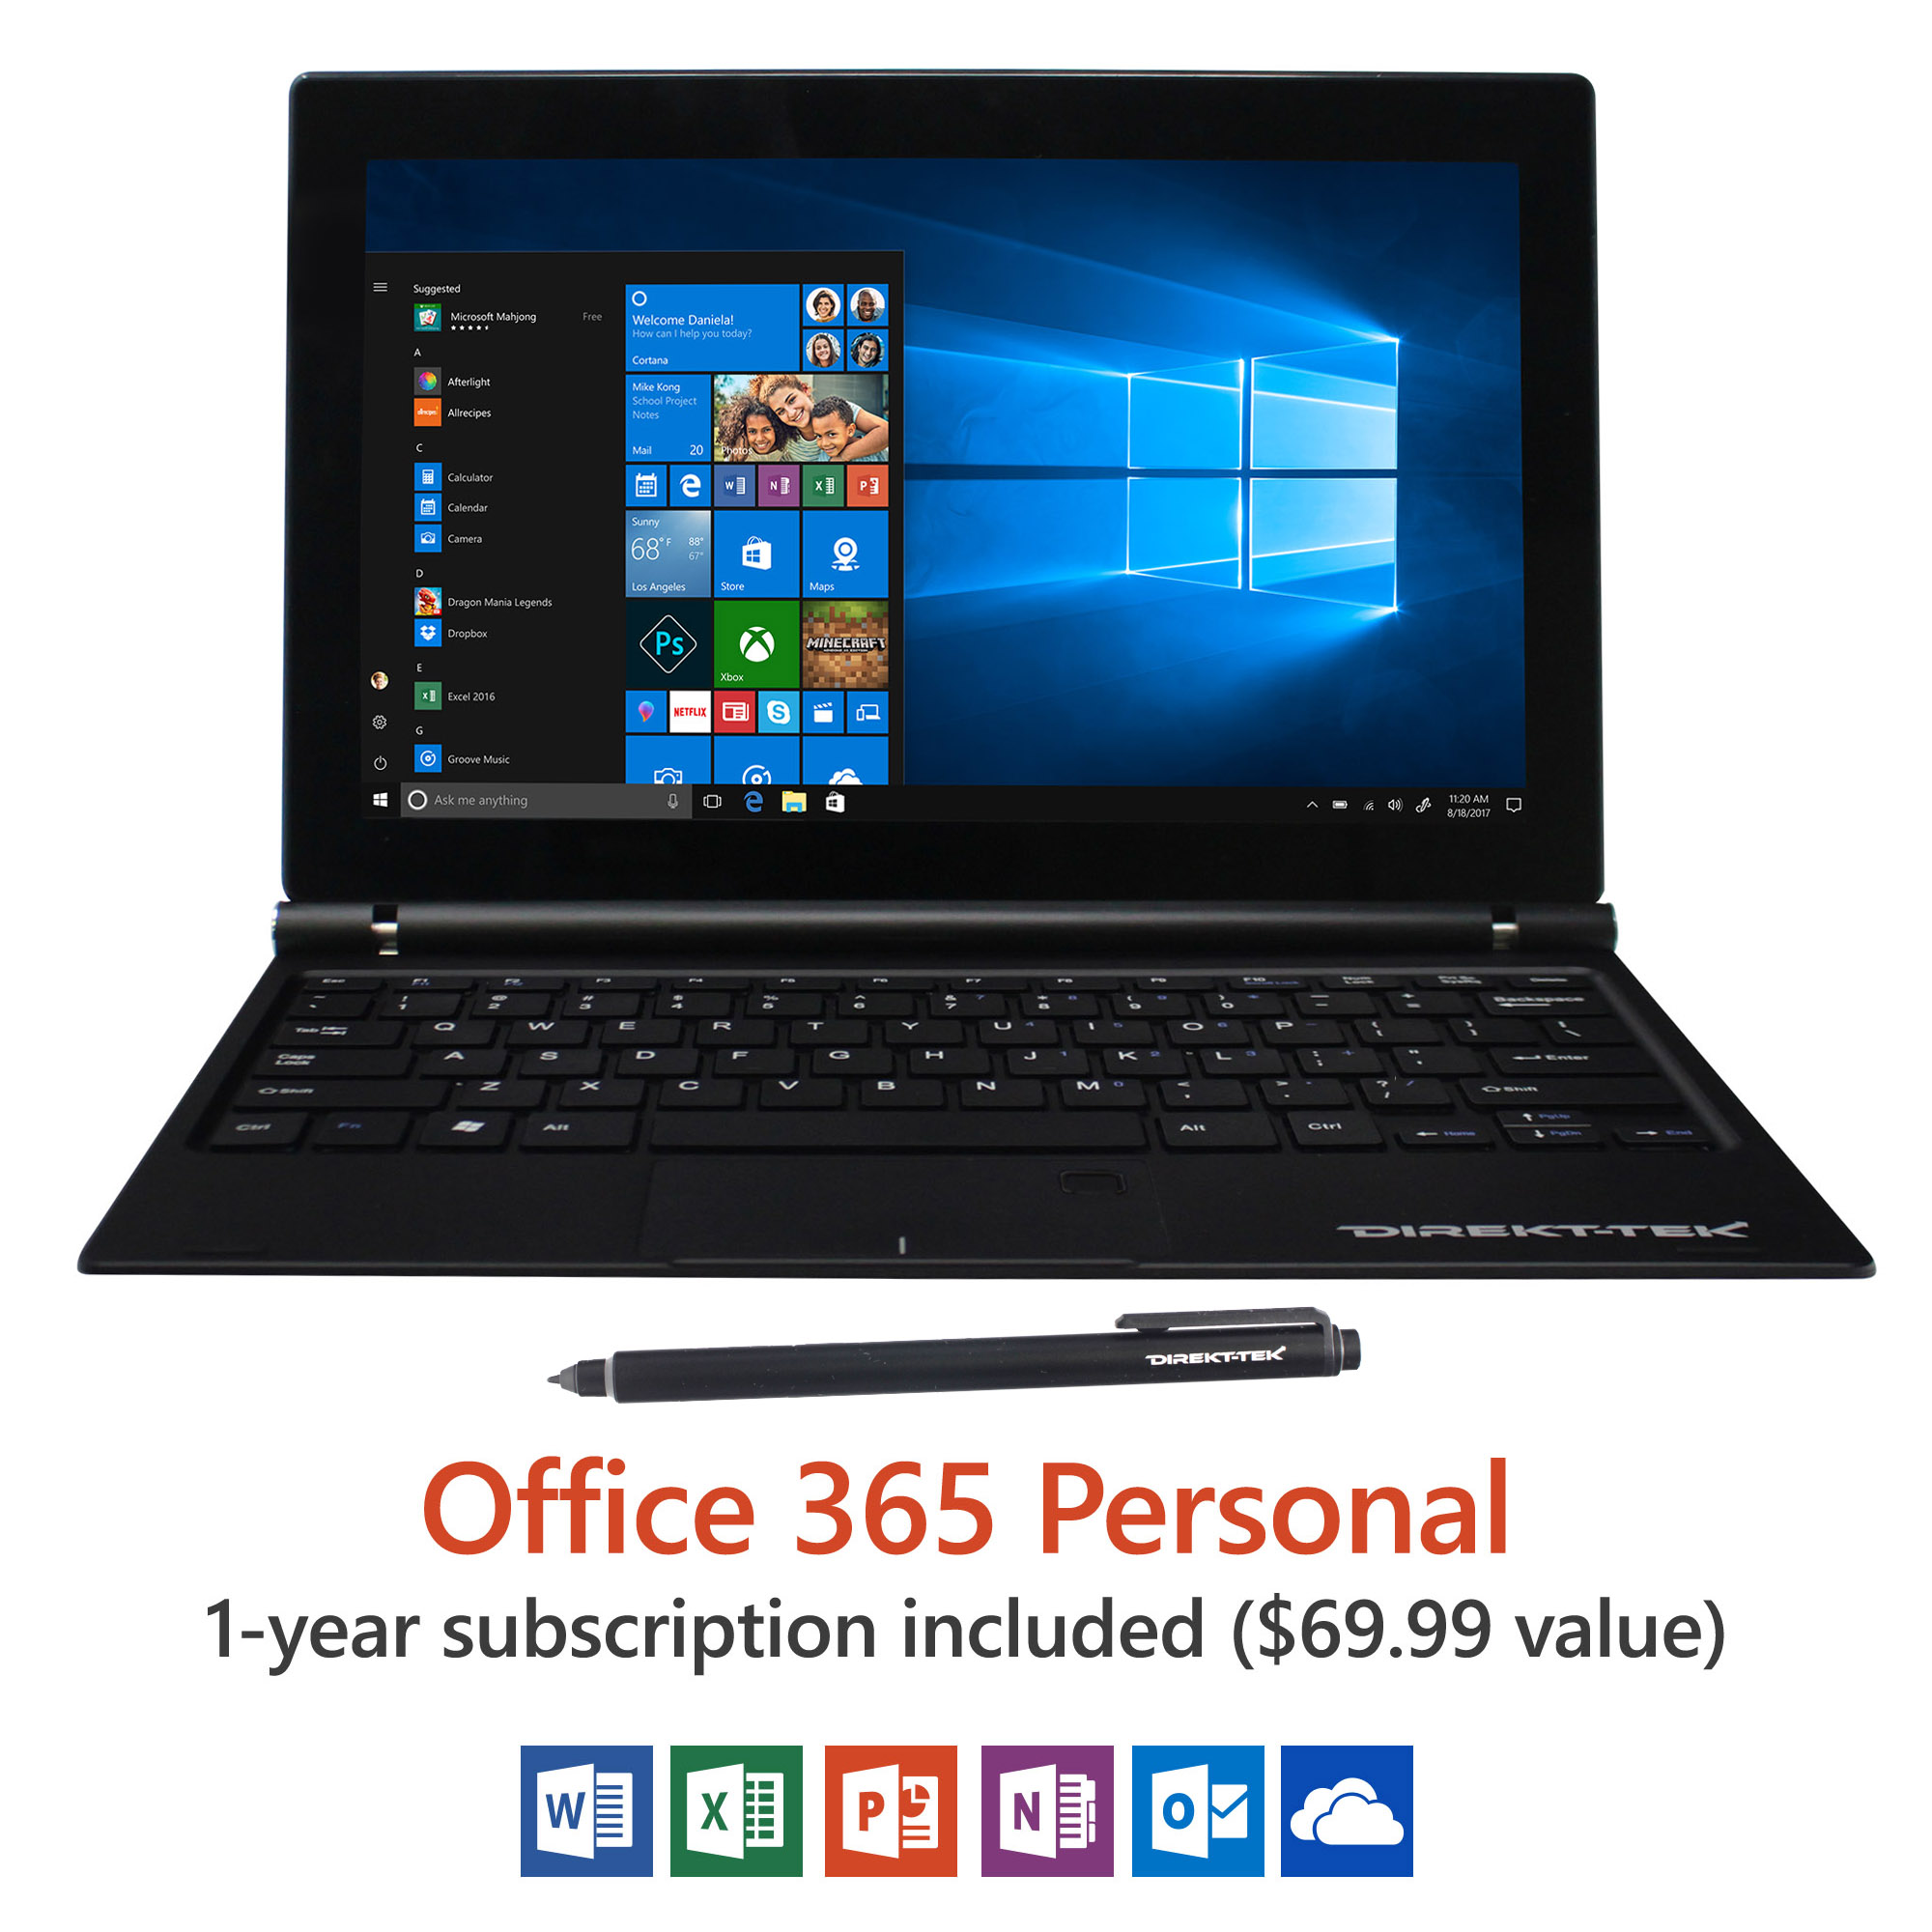 Direkt-Tek 11.6" FHD Tablet with Keyboard, Windows 10, Office 365 Personal 1-Year Subscription Included ($69.99 Value), Windows Hello (Fingerprint Reader), Windows Ink (Smart Stylus included) - image 1 of 6